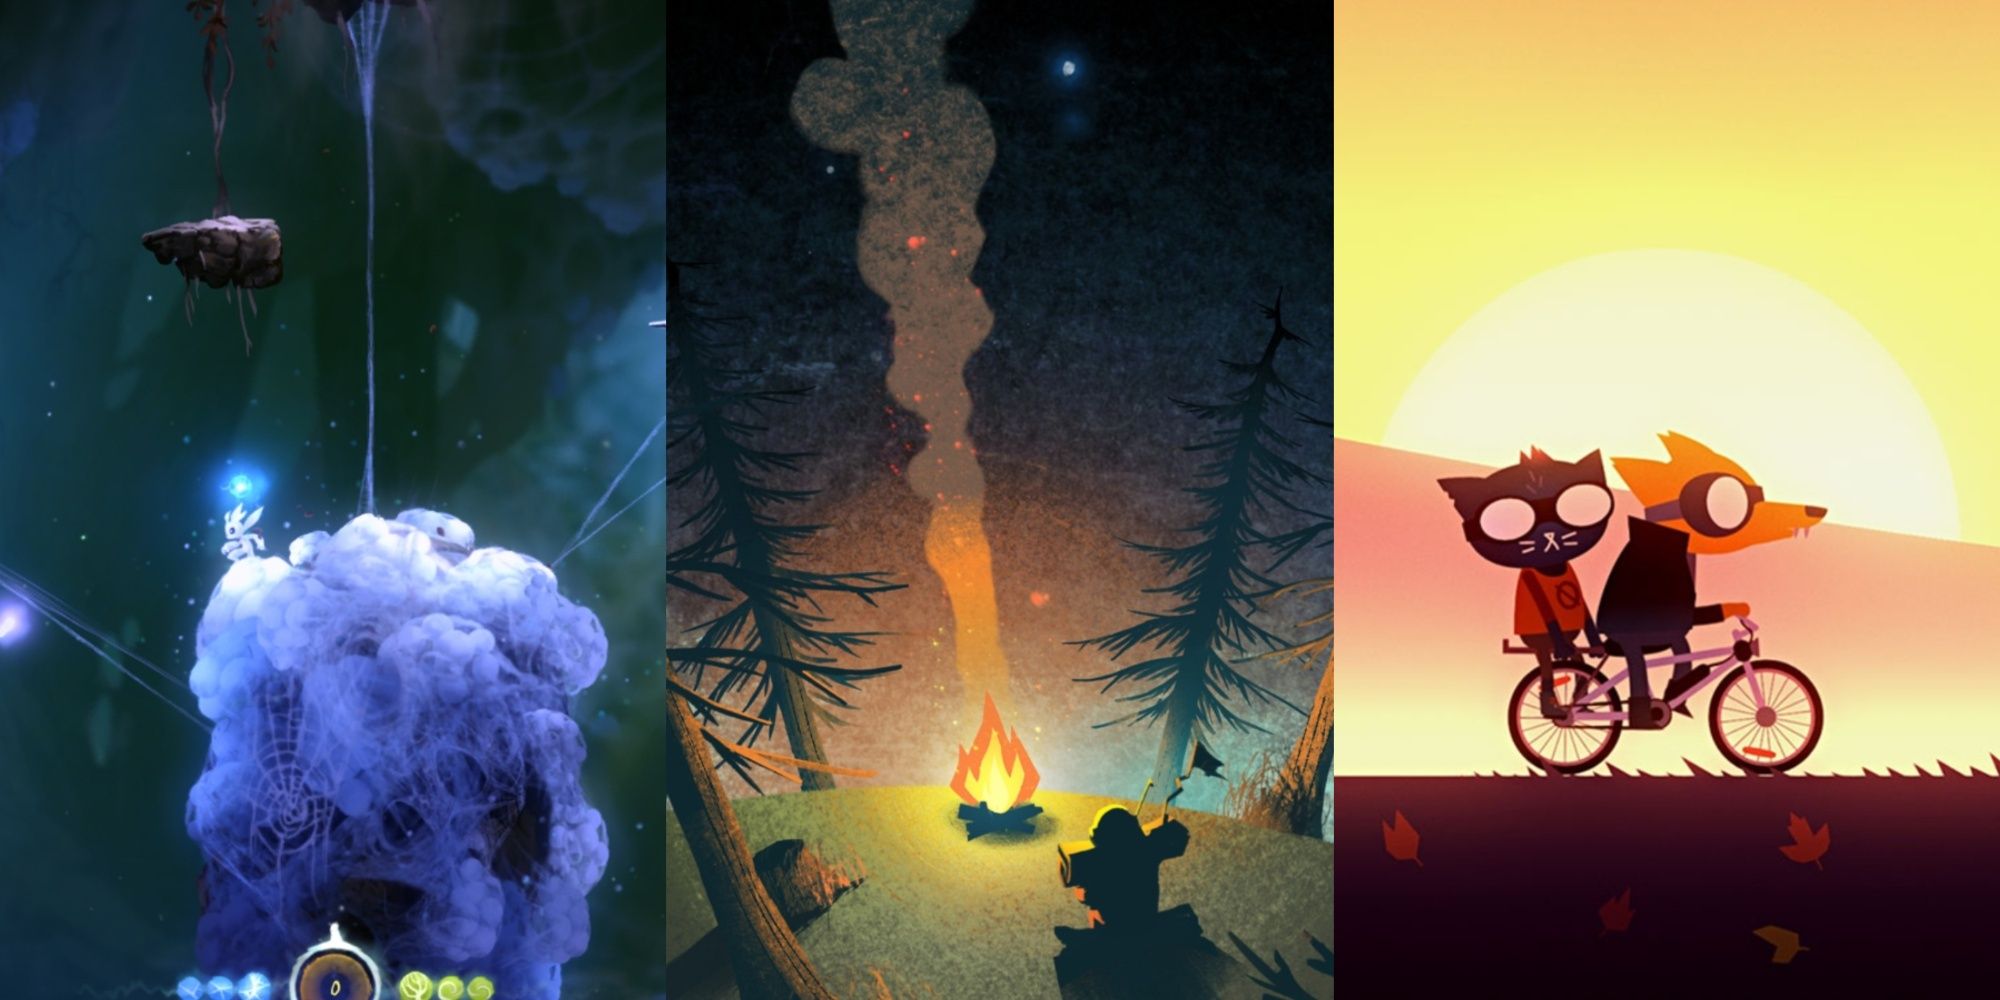 A trisplit of Ori on a white platform in Ori And The Blind Forest, a character from Outer Wilds in front of a fire, and Mae and Gregg on a bike in Night in the Woods